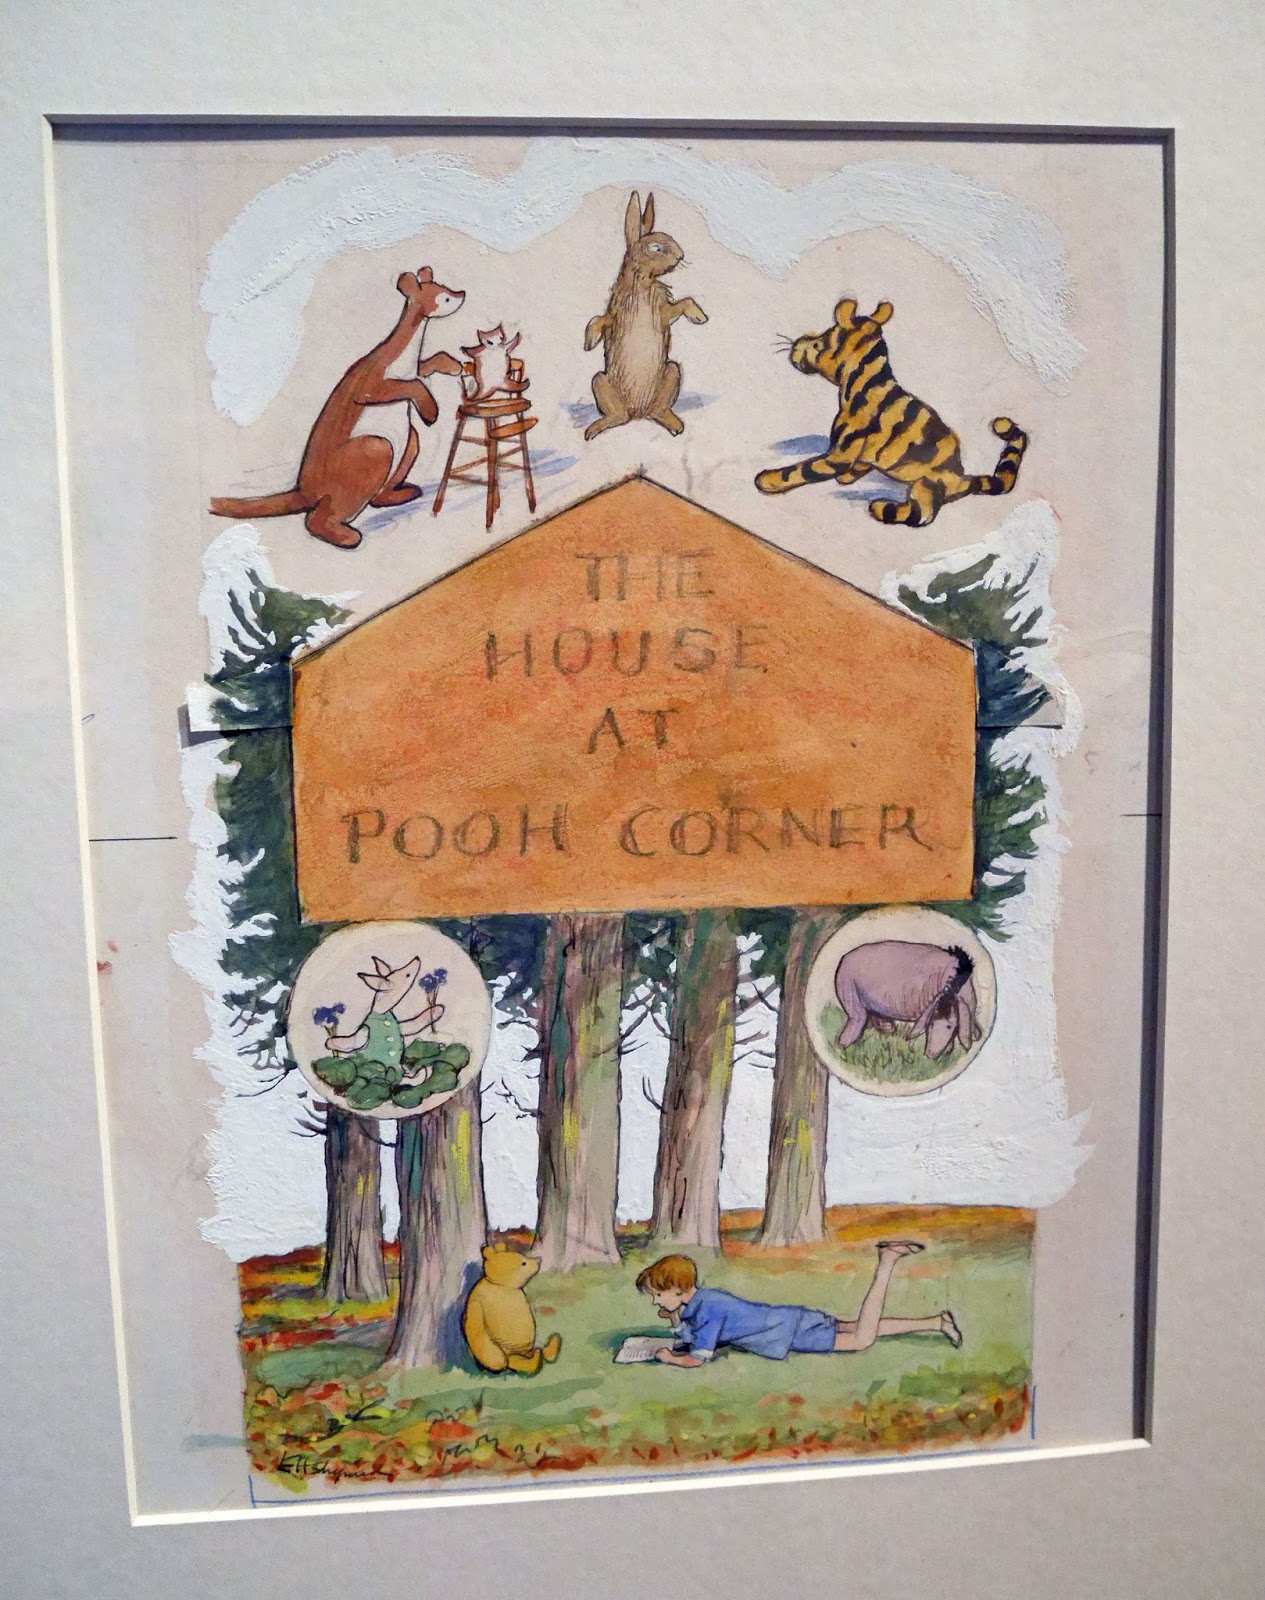 'The House at Pooh Corner' artwork at the Winnie the Pooh: Exploring a Classic exhibition, London